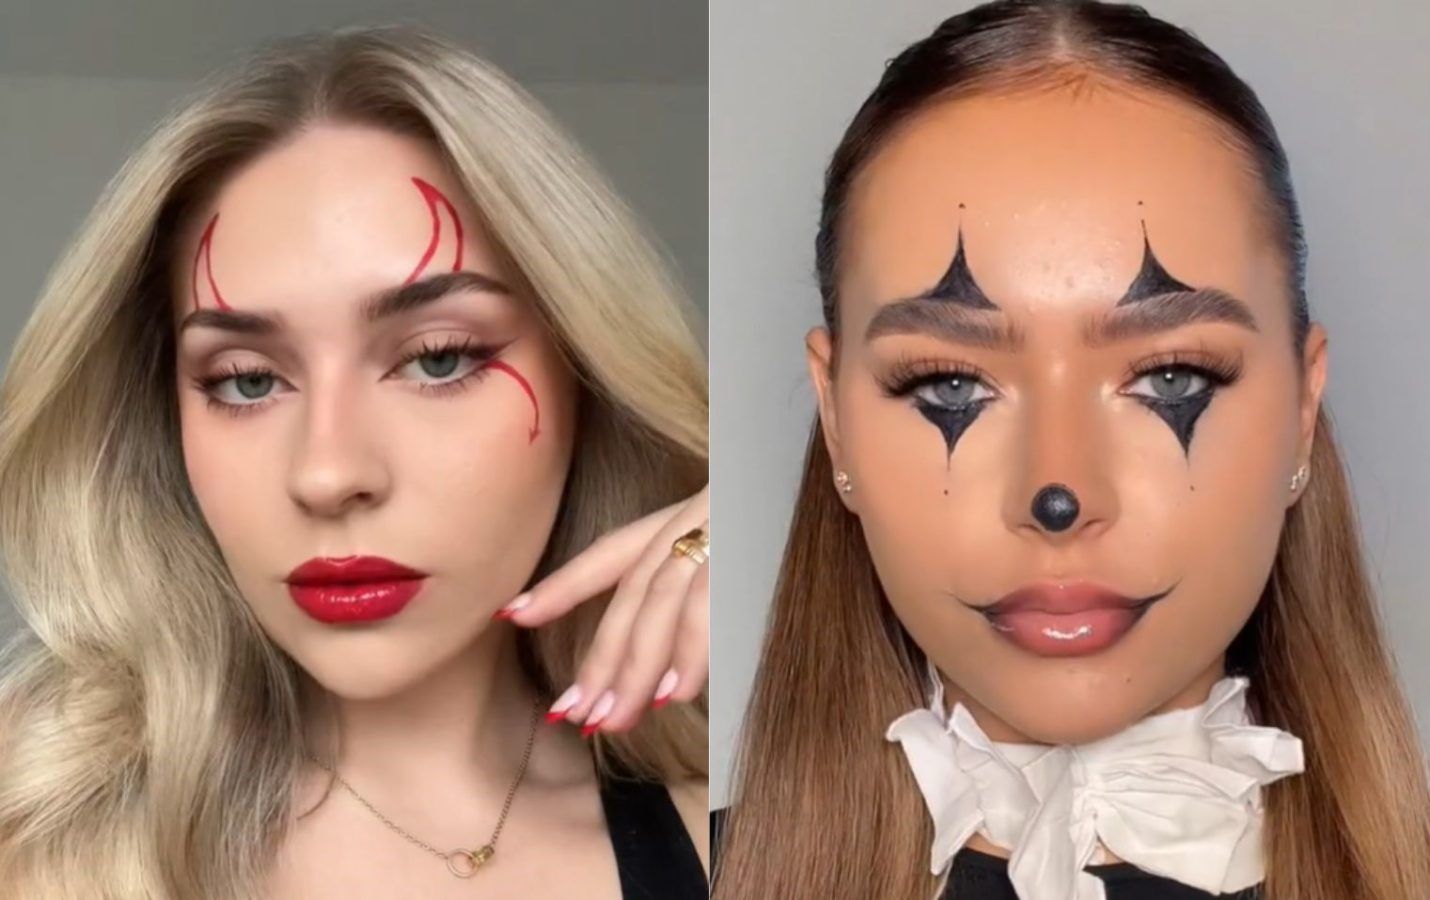 This Clown Makeup Tutorial Is So Easy to Follow